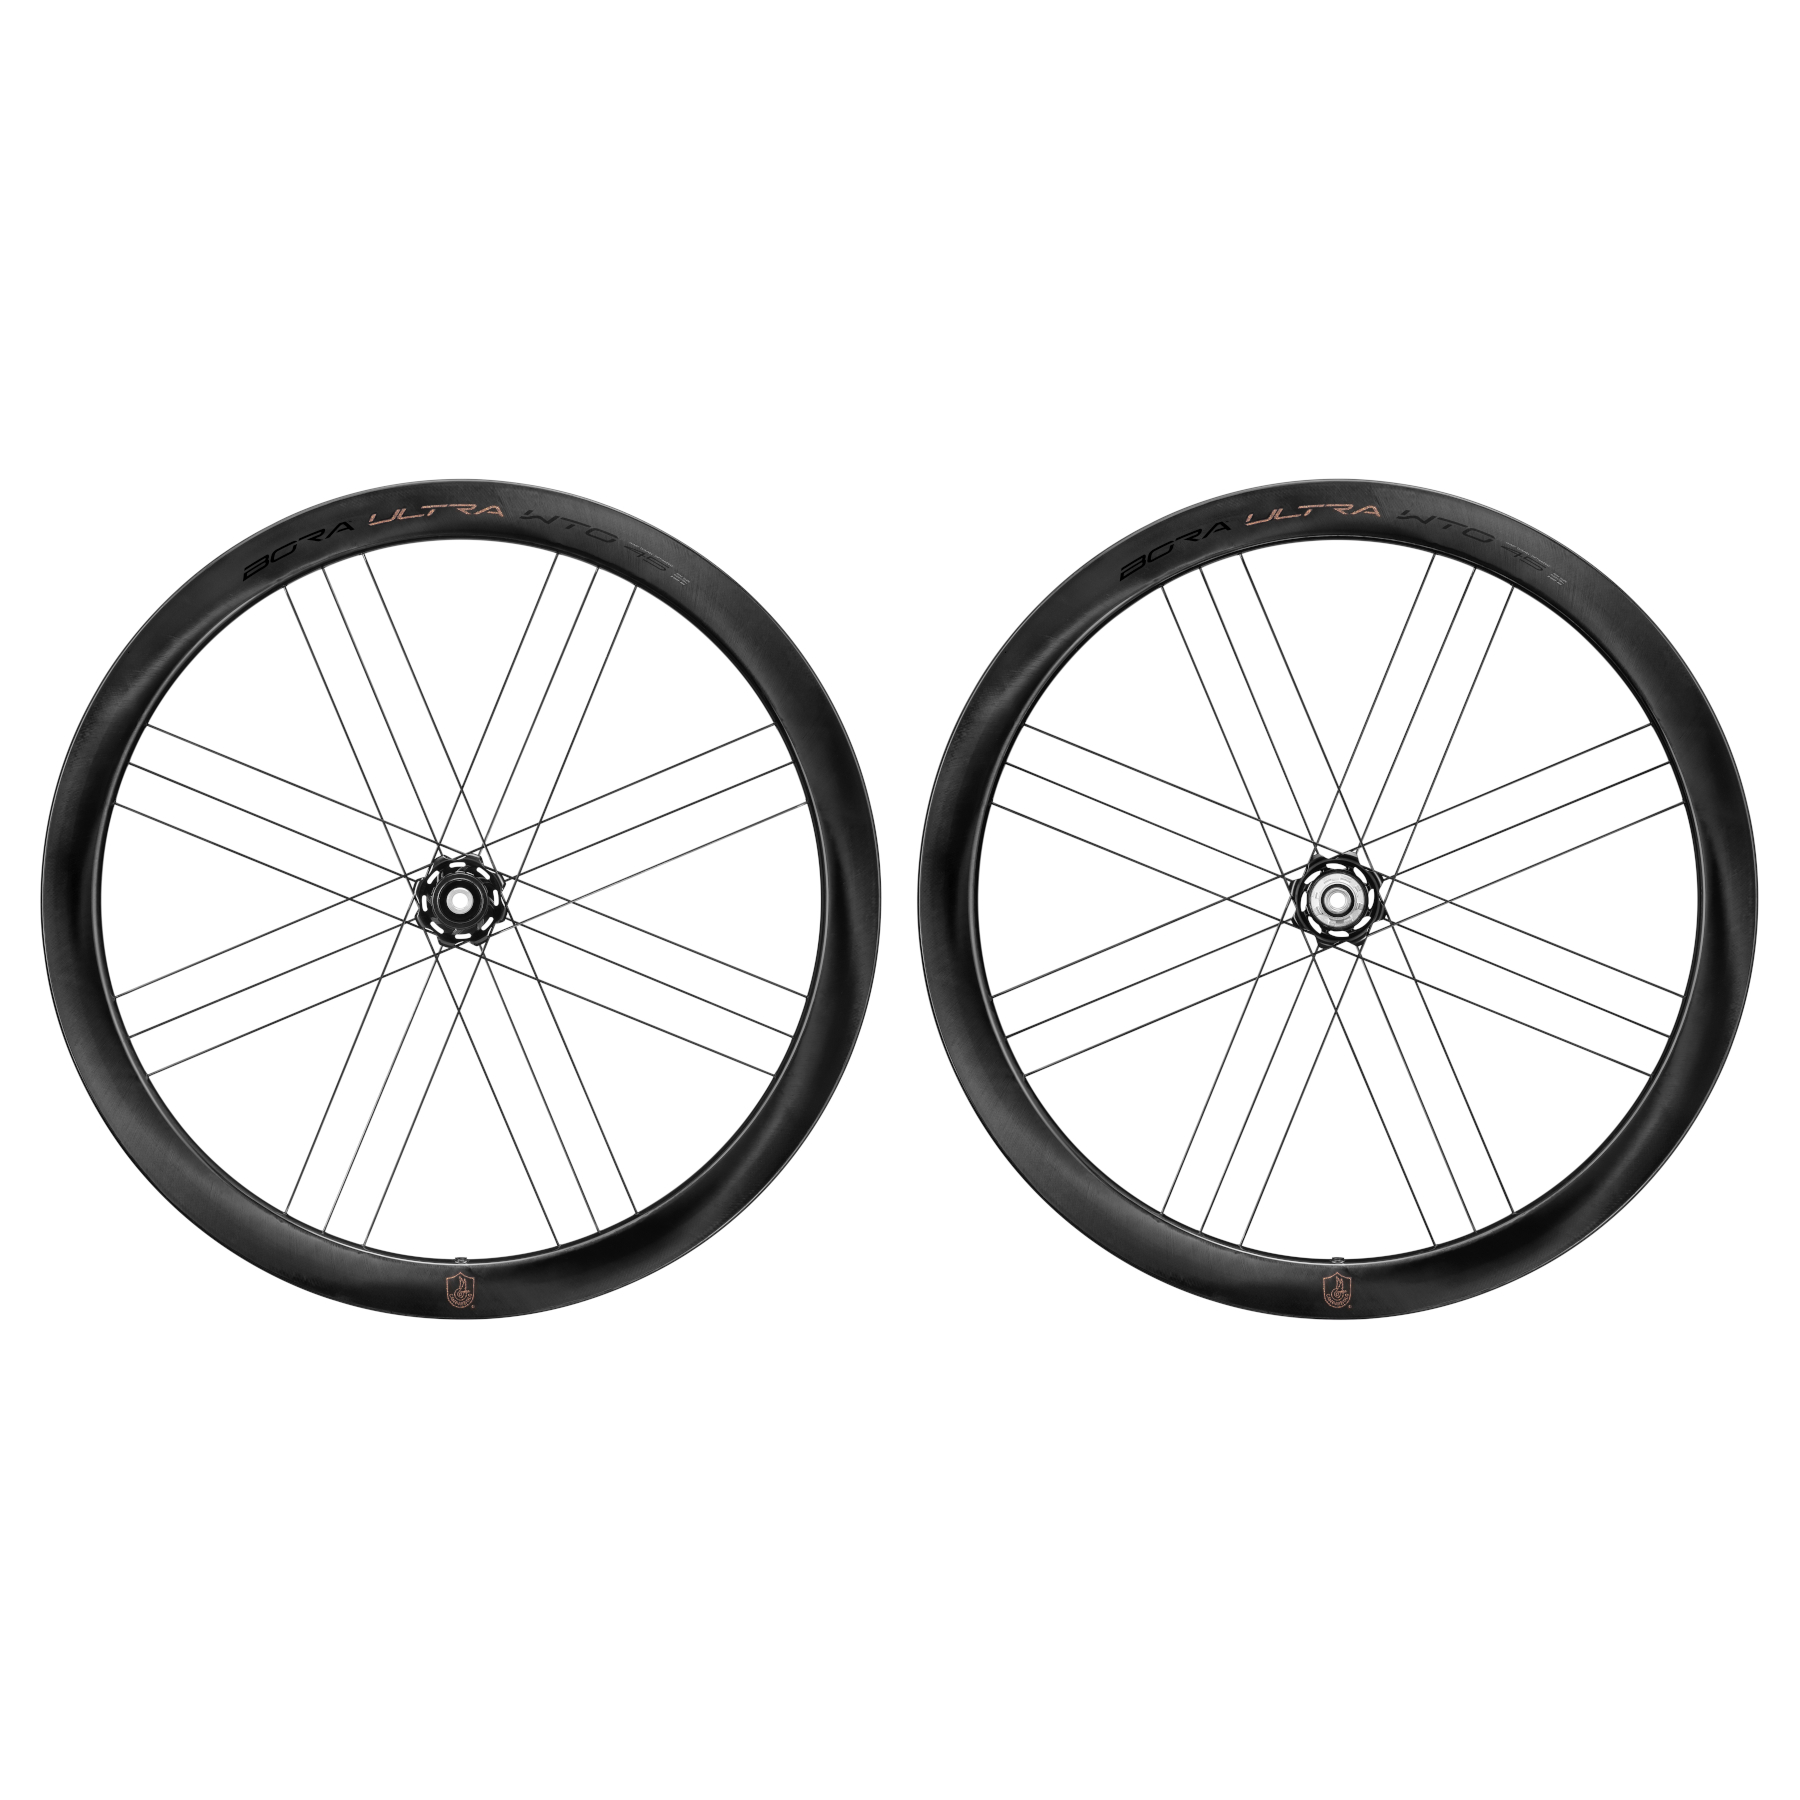 Picture of Campagnolo Bora Ultra WTO 45 DB - 28 Inch Carbon Wheelset - 2-Way Fit - AFS - SRAM XDR